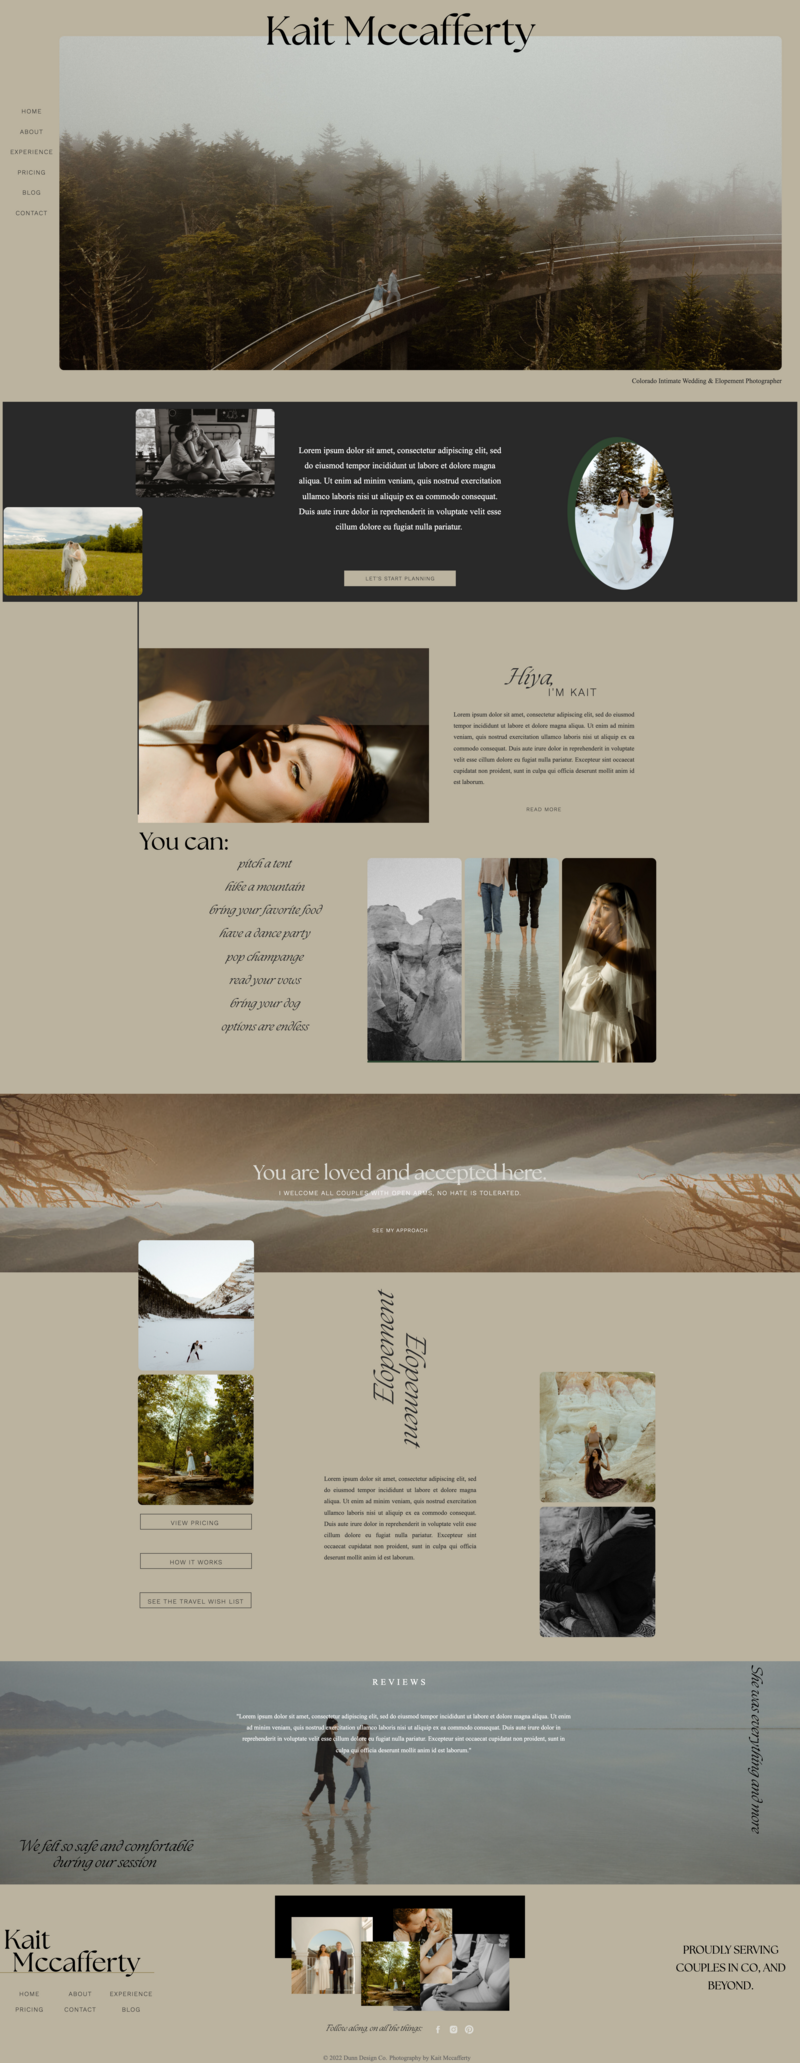 Website template preview black background